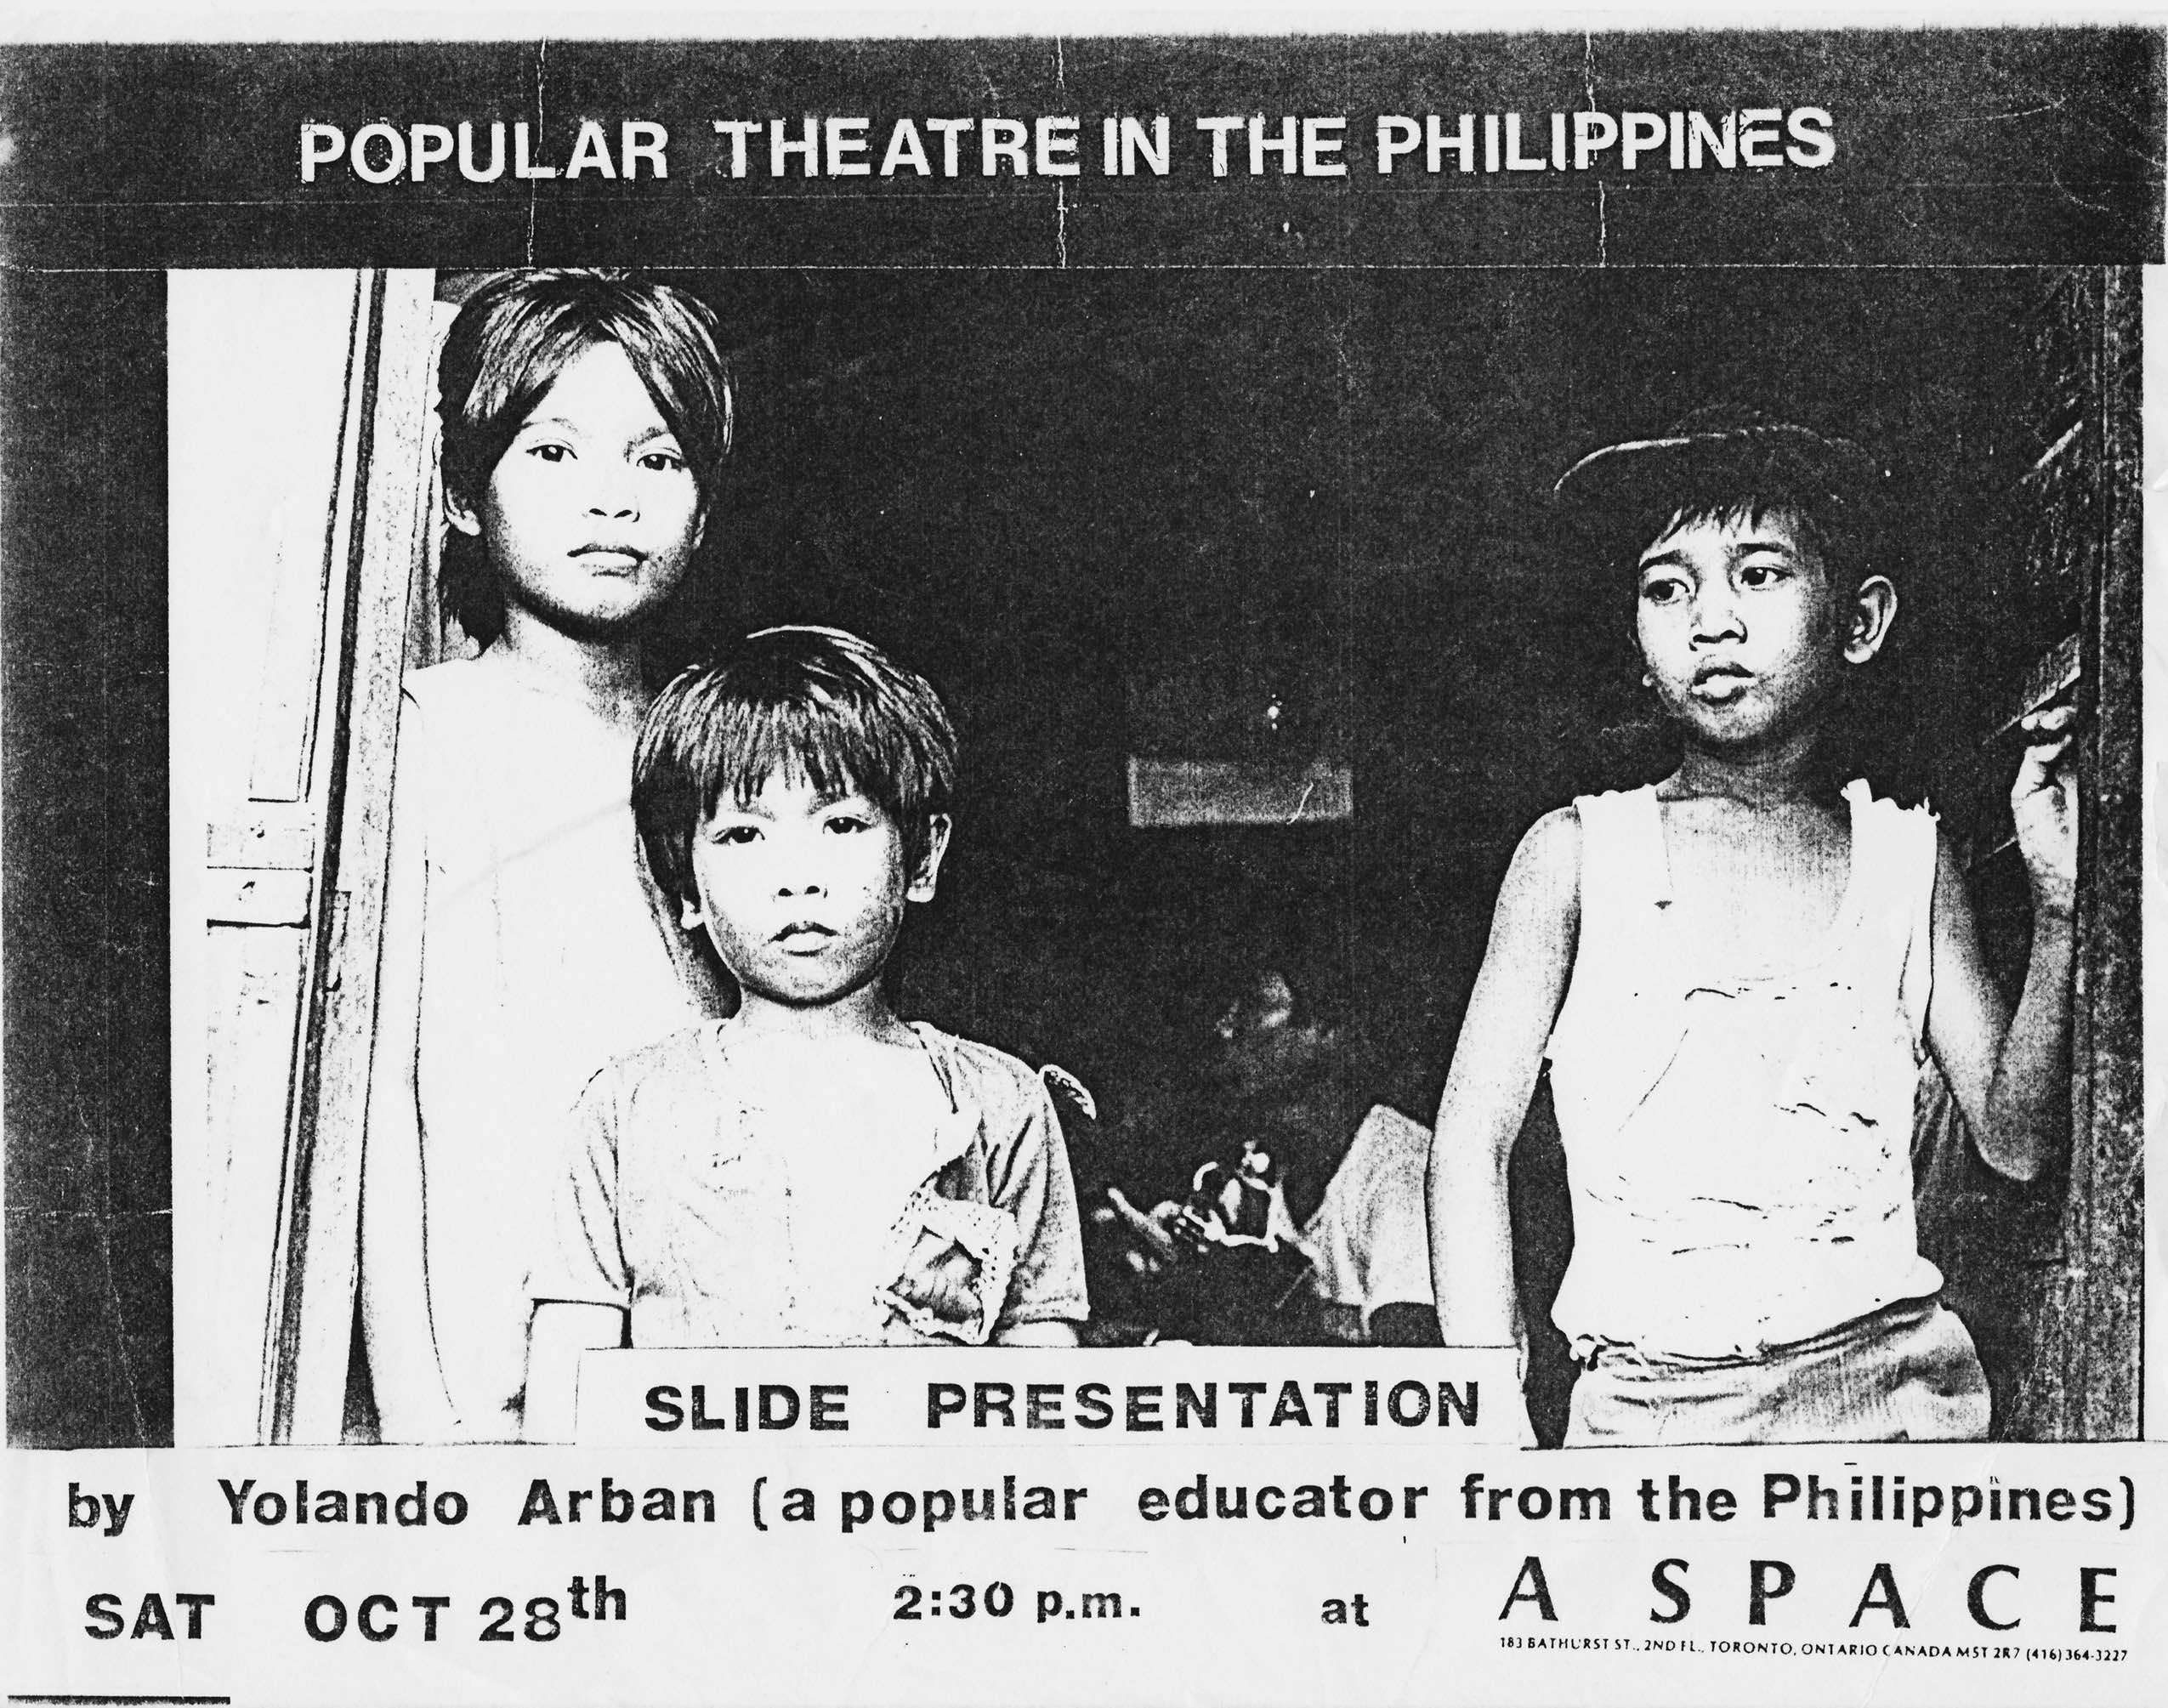 Poster for a slide presentation on Popular Theatre in the Philippines